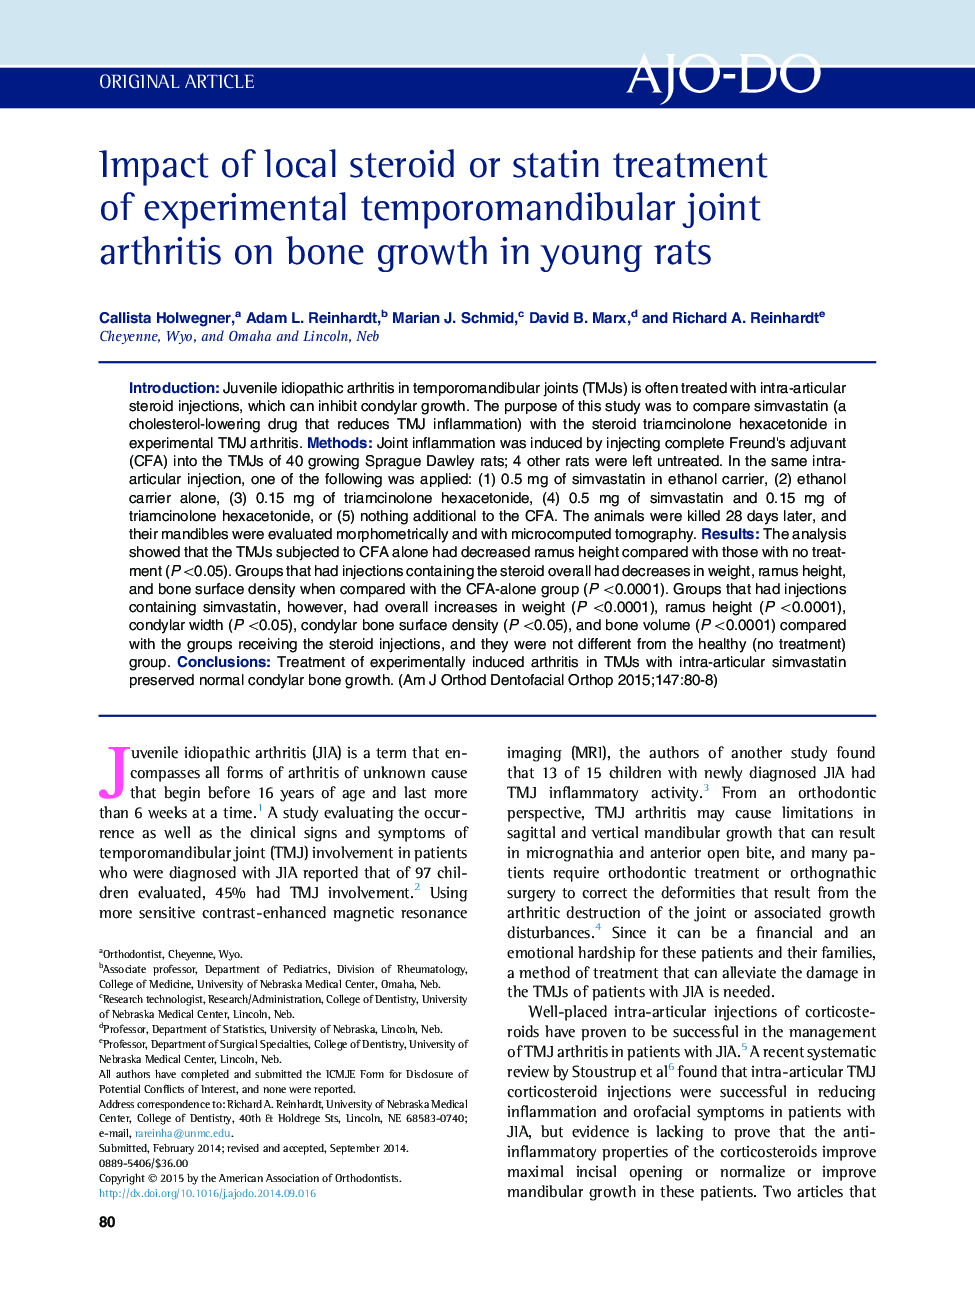 Impact of local steroid or statin treatment of experimental temporomandibular joint arthritis on bone growth in young rats 